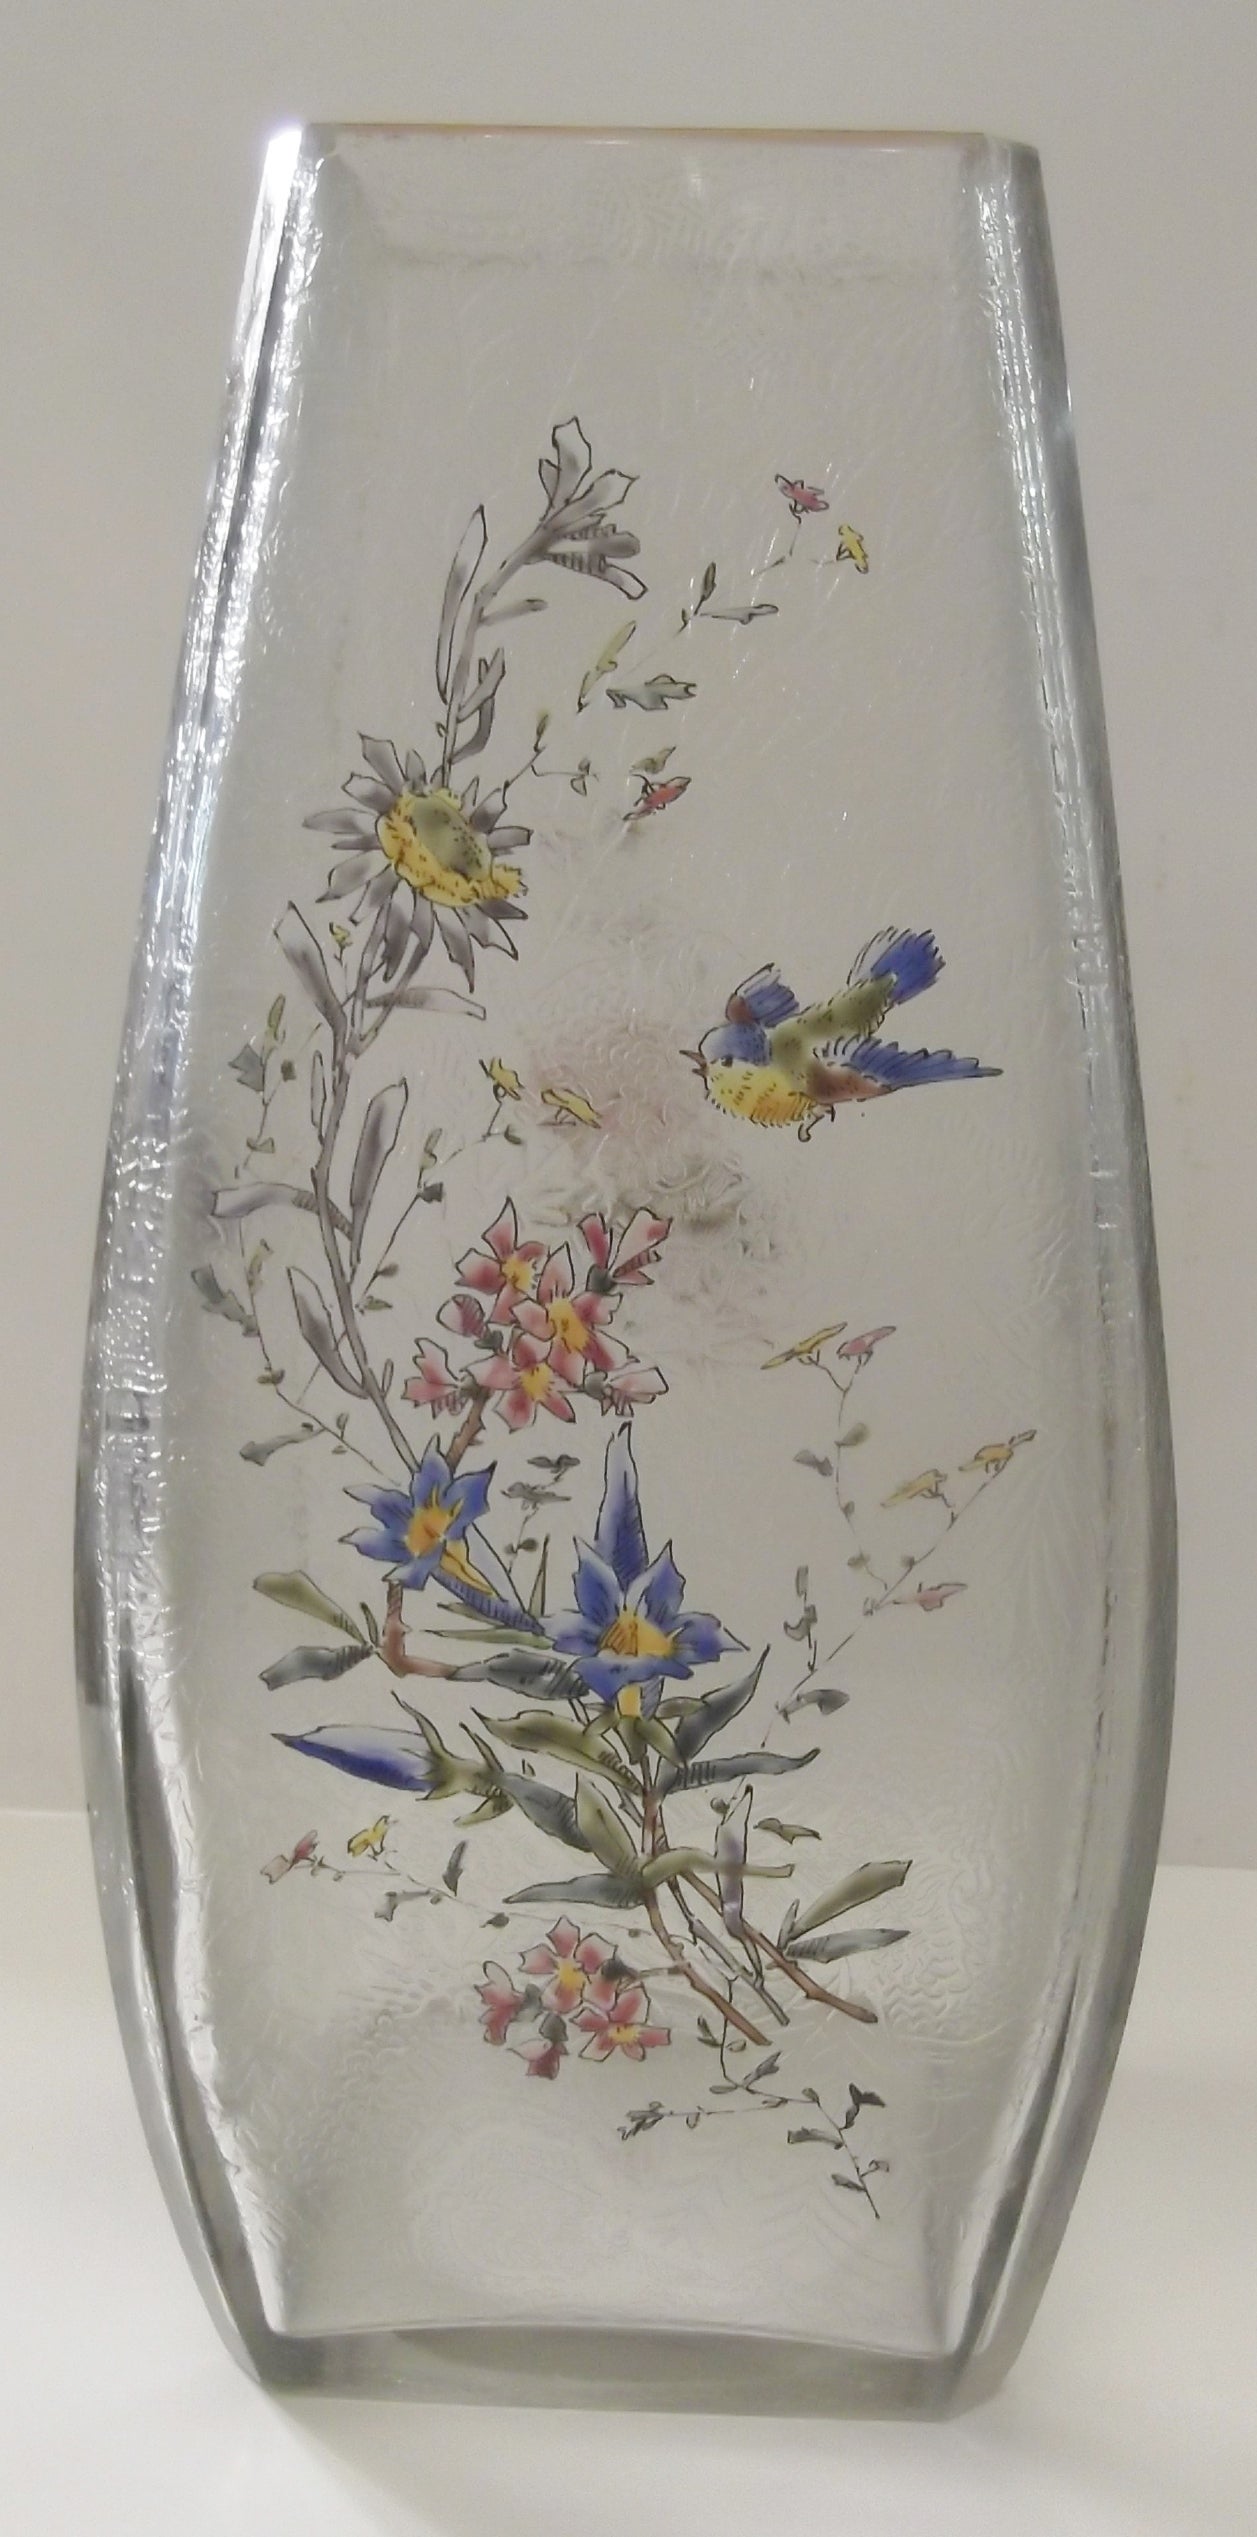 A fine pair of Mont Joye French acid etched glass and enameled rectangular tapered vases.
The interior is acid etched design, with the exterior hand enameled with birds, floral branched and butterflies mainly on the fronts, small sprigs on the back